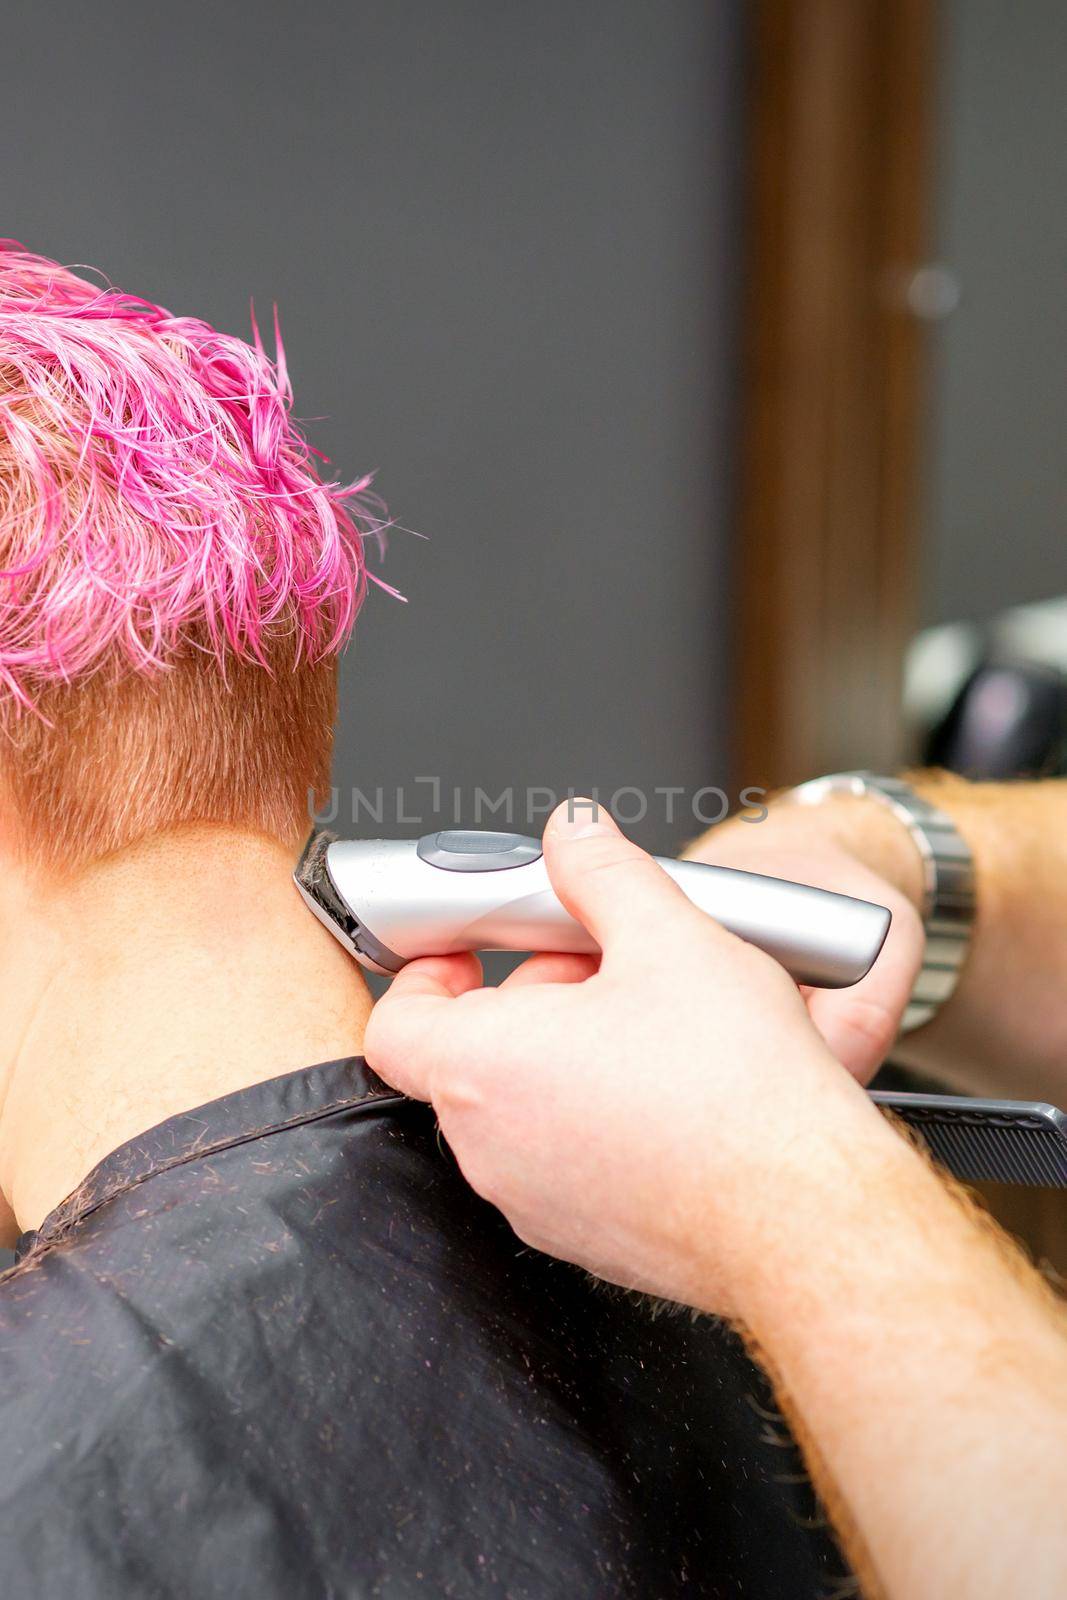 Male hairdresser shaves neck of a young caucasian woman with a short pink hairstyle by electric shaver in a hairdresser salon, close up. by okskukuruza